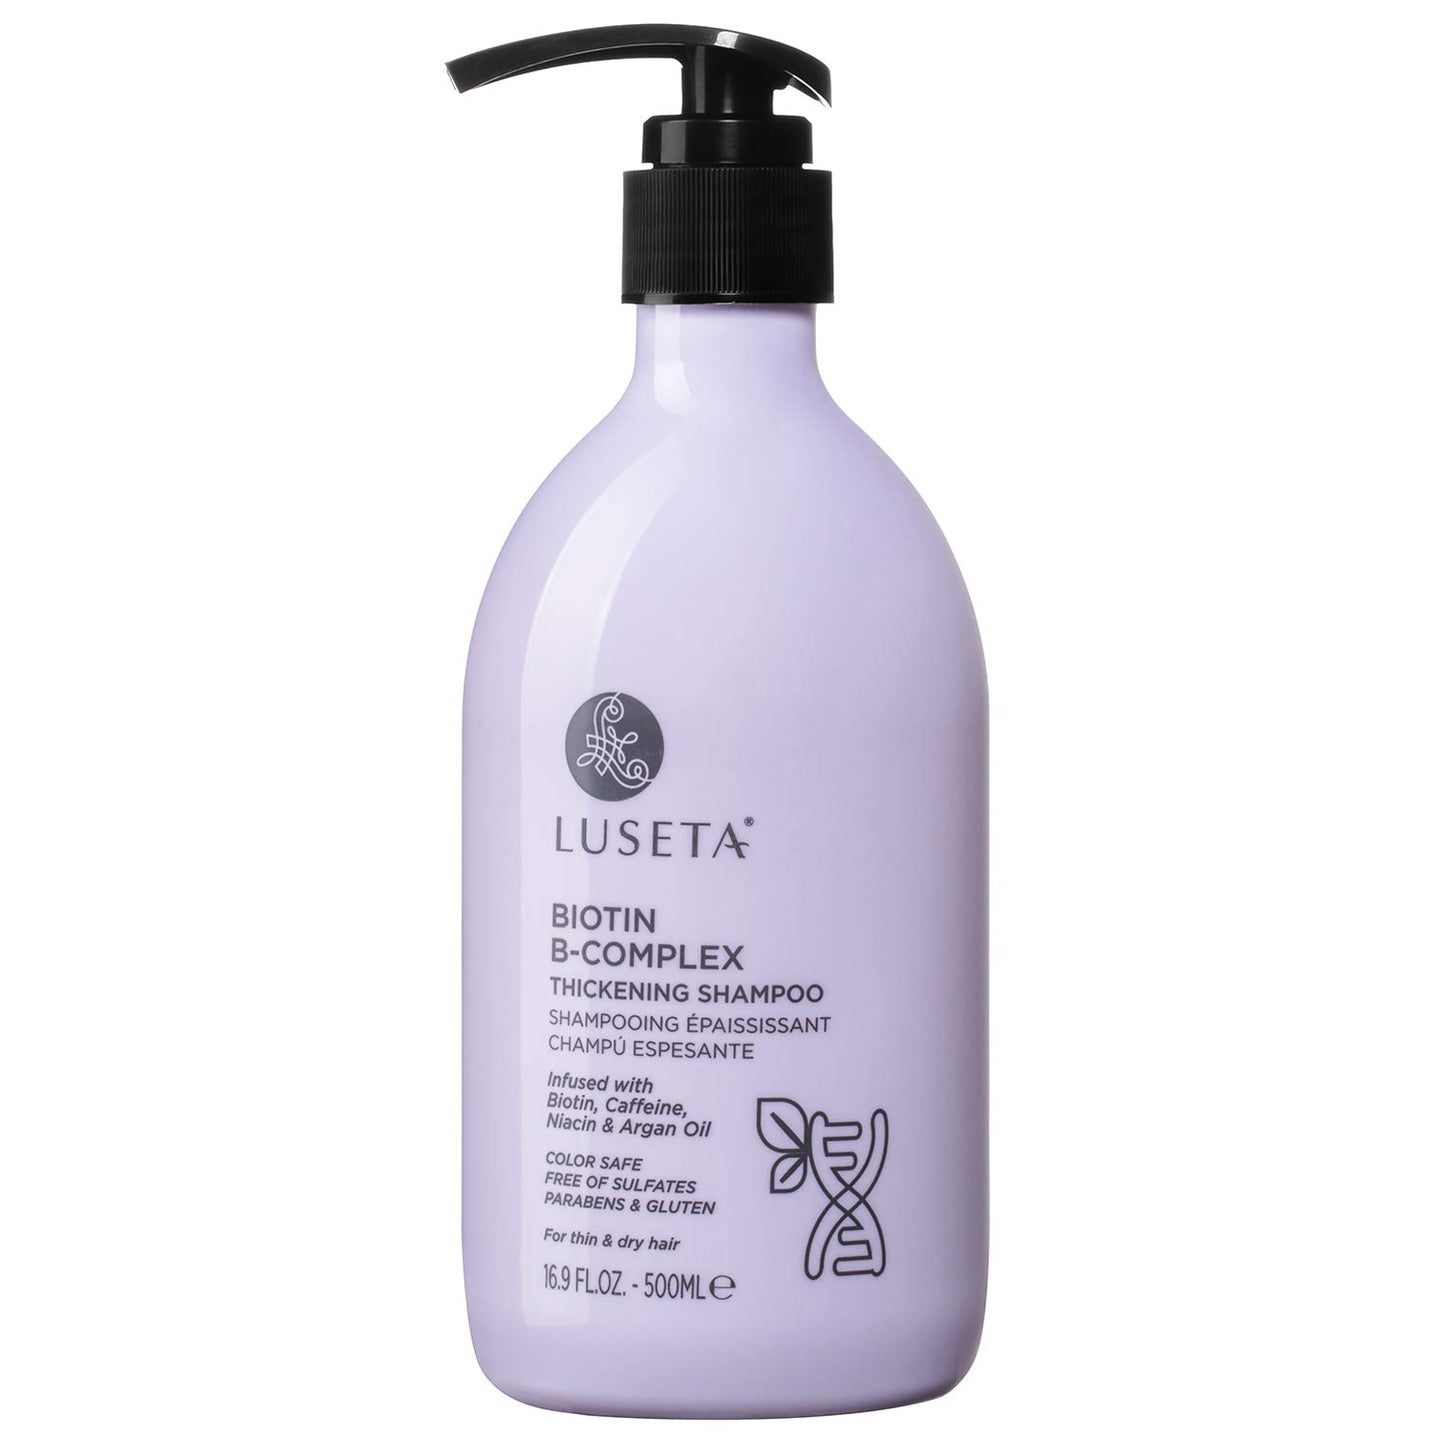 (hair shampoo) - Luseta Biotin B-Complex Thickening Shampoo for Hair Growth and Strengthener - Hair Loss Treatment for Thinning Hair With Biotin Caffein and Argan Oil for Men & Women - All Hair Typ...